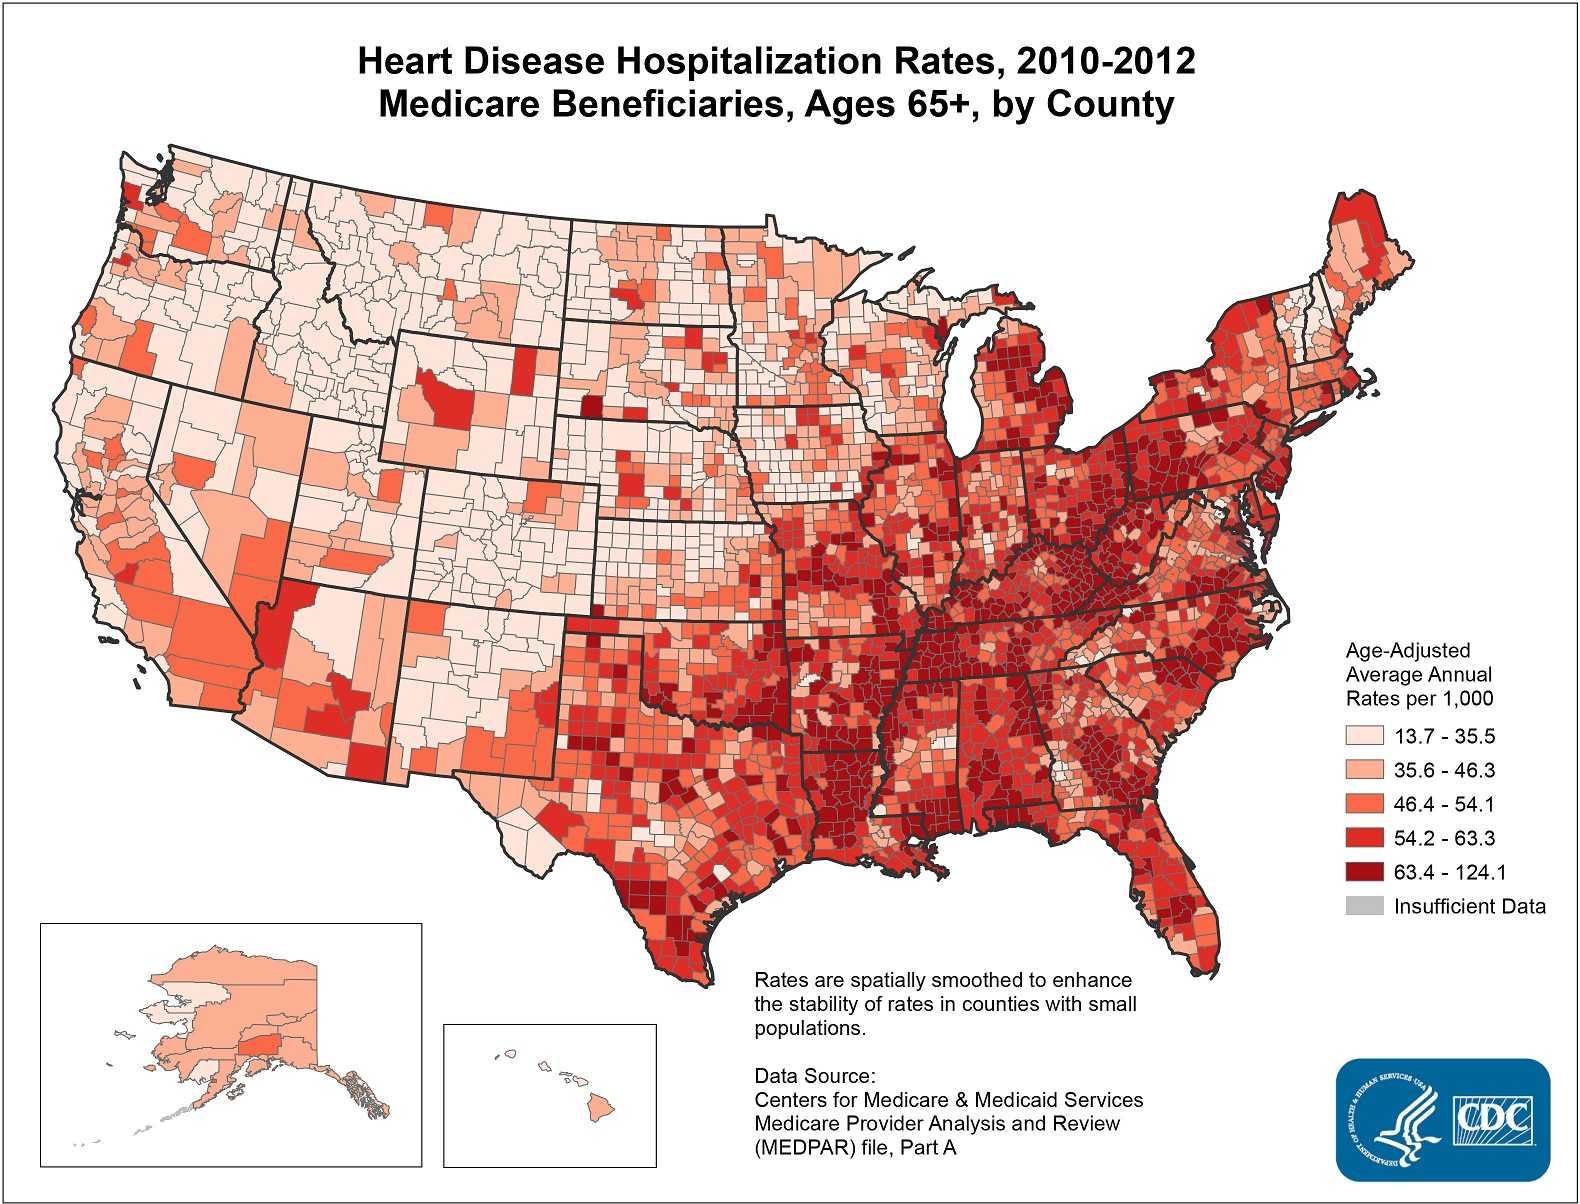 The map shows that concentrations of counties with the highest heart disease hospitalization rates - meaning the top quintile - are located primarily in Louisiana, Kentucky, West Virginia, Pennsylvania, and Tennessee.  Pockets of high-rate counties also were found in Alabama, Georgia, North Carolina, Mississippi, Arkansas, Missouri, Texas, and Michigan.